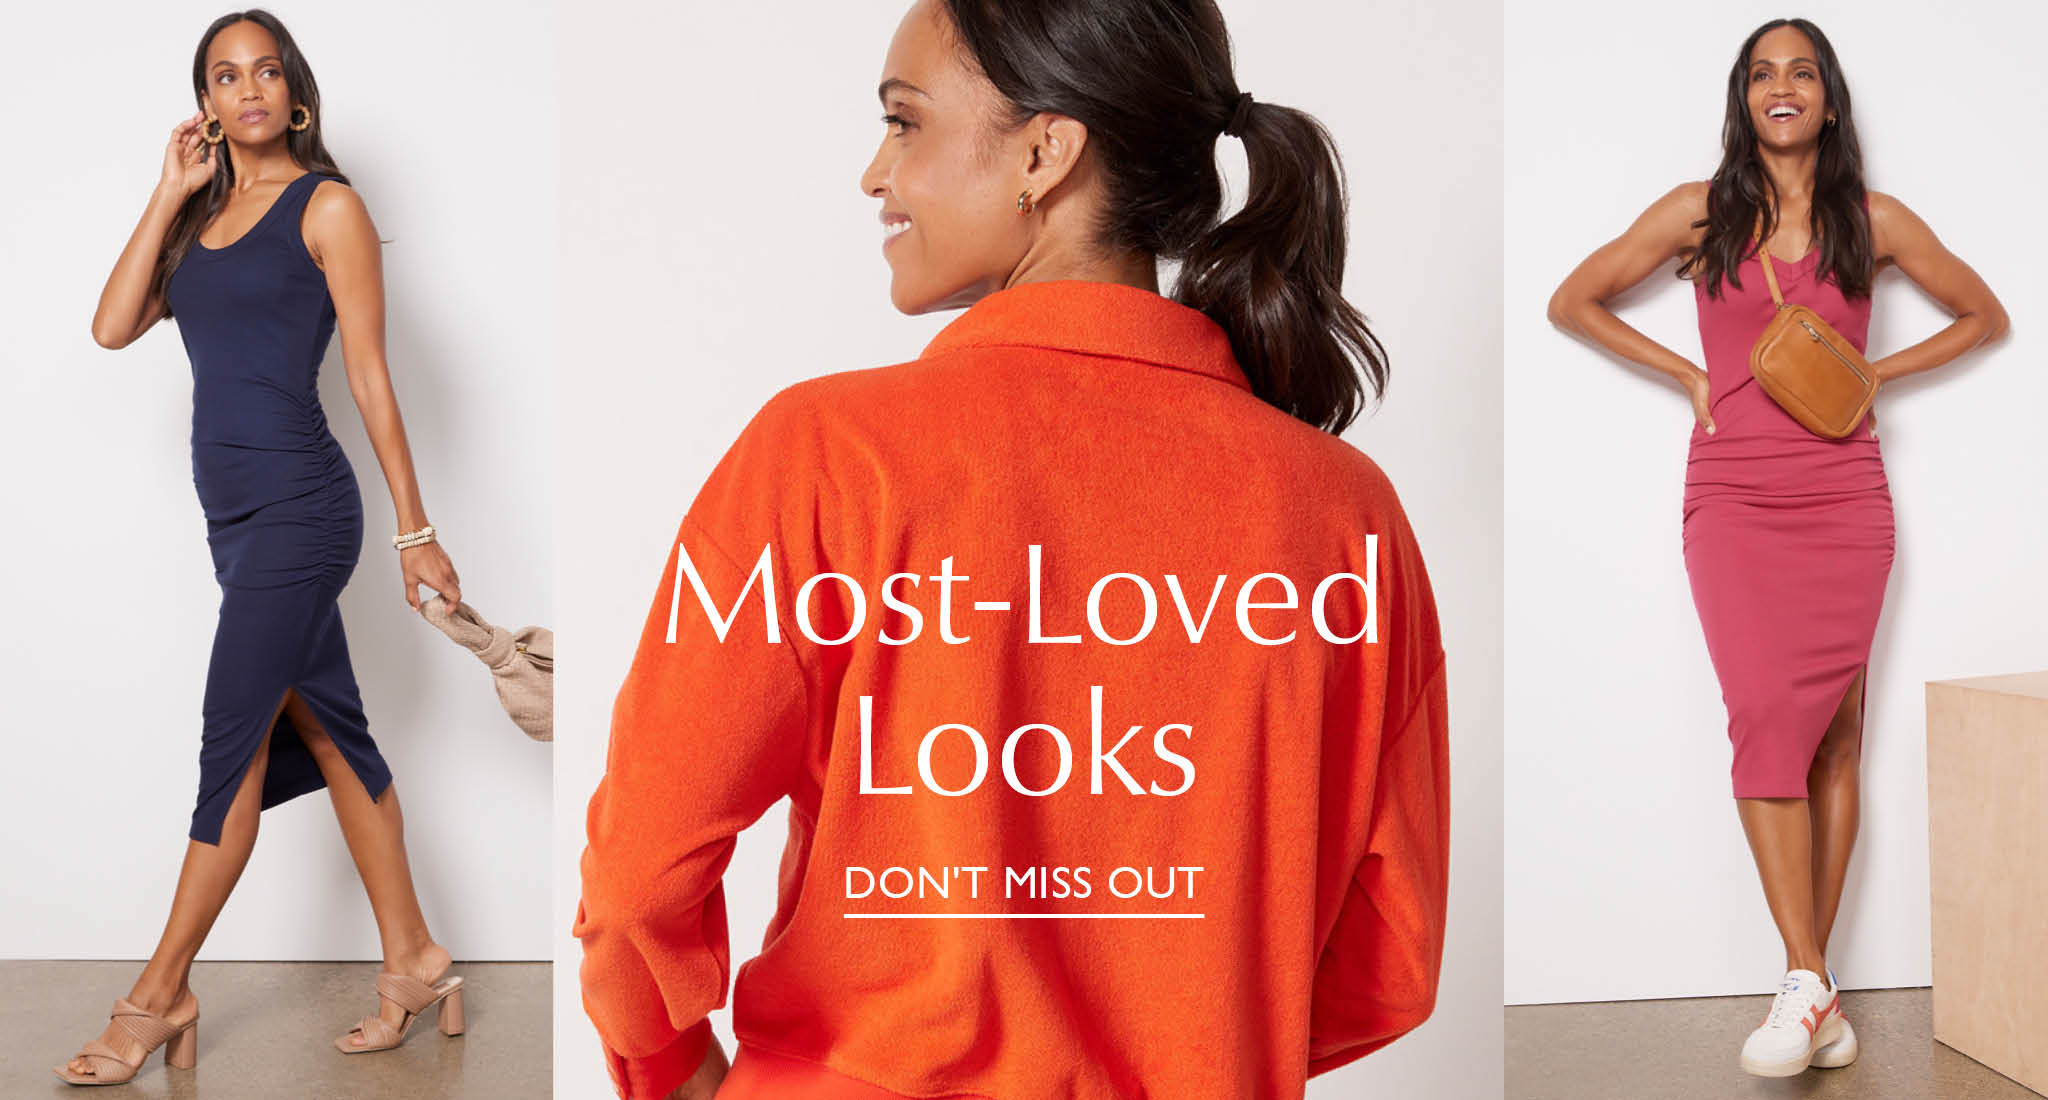 Most-loved looks. Don’t miss out - Shop Now.